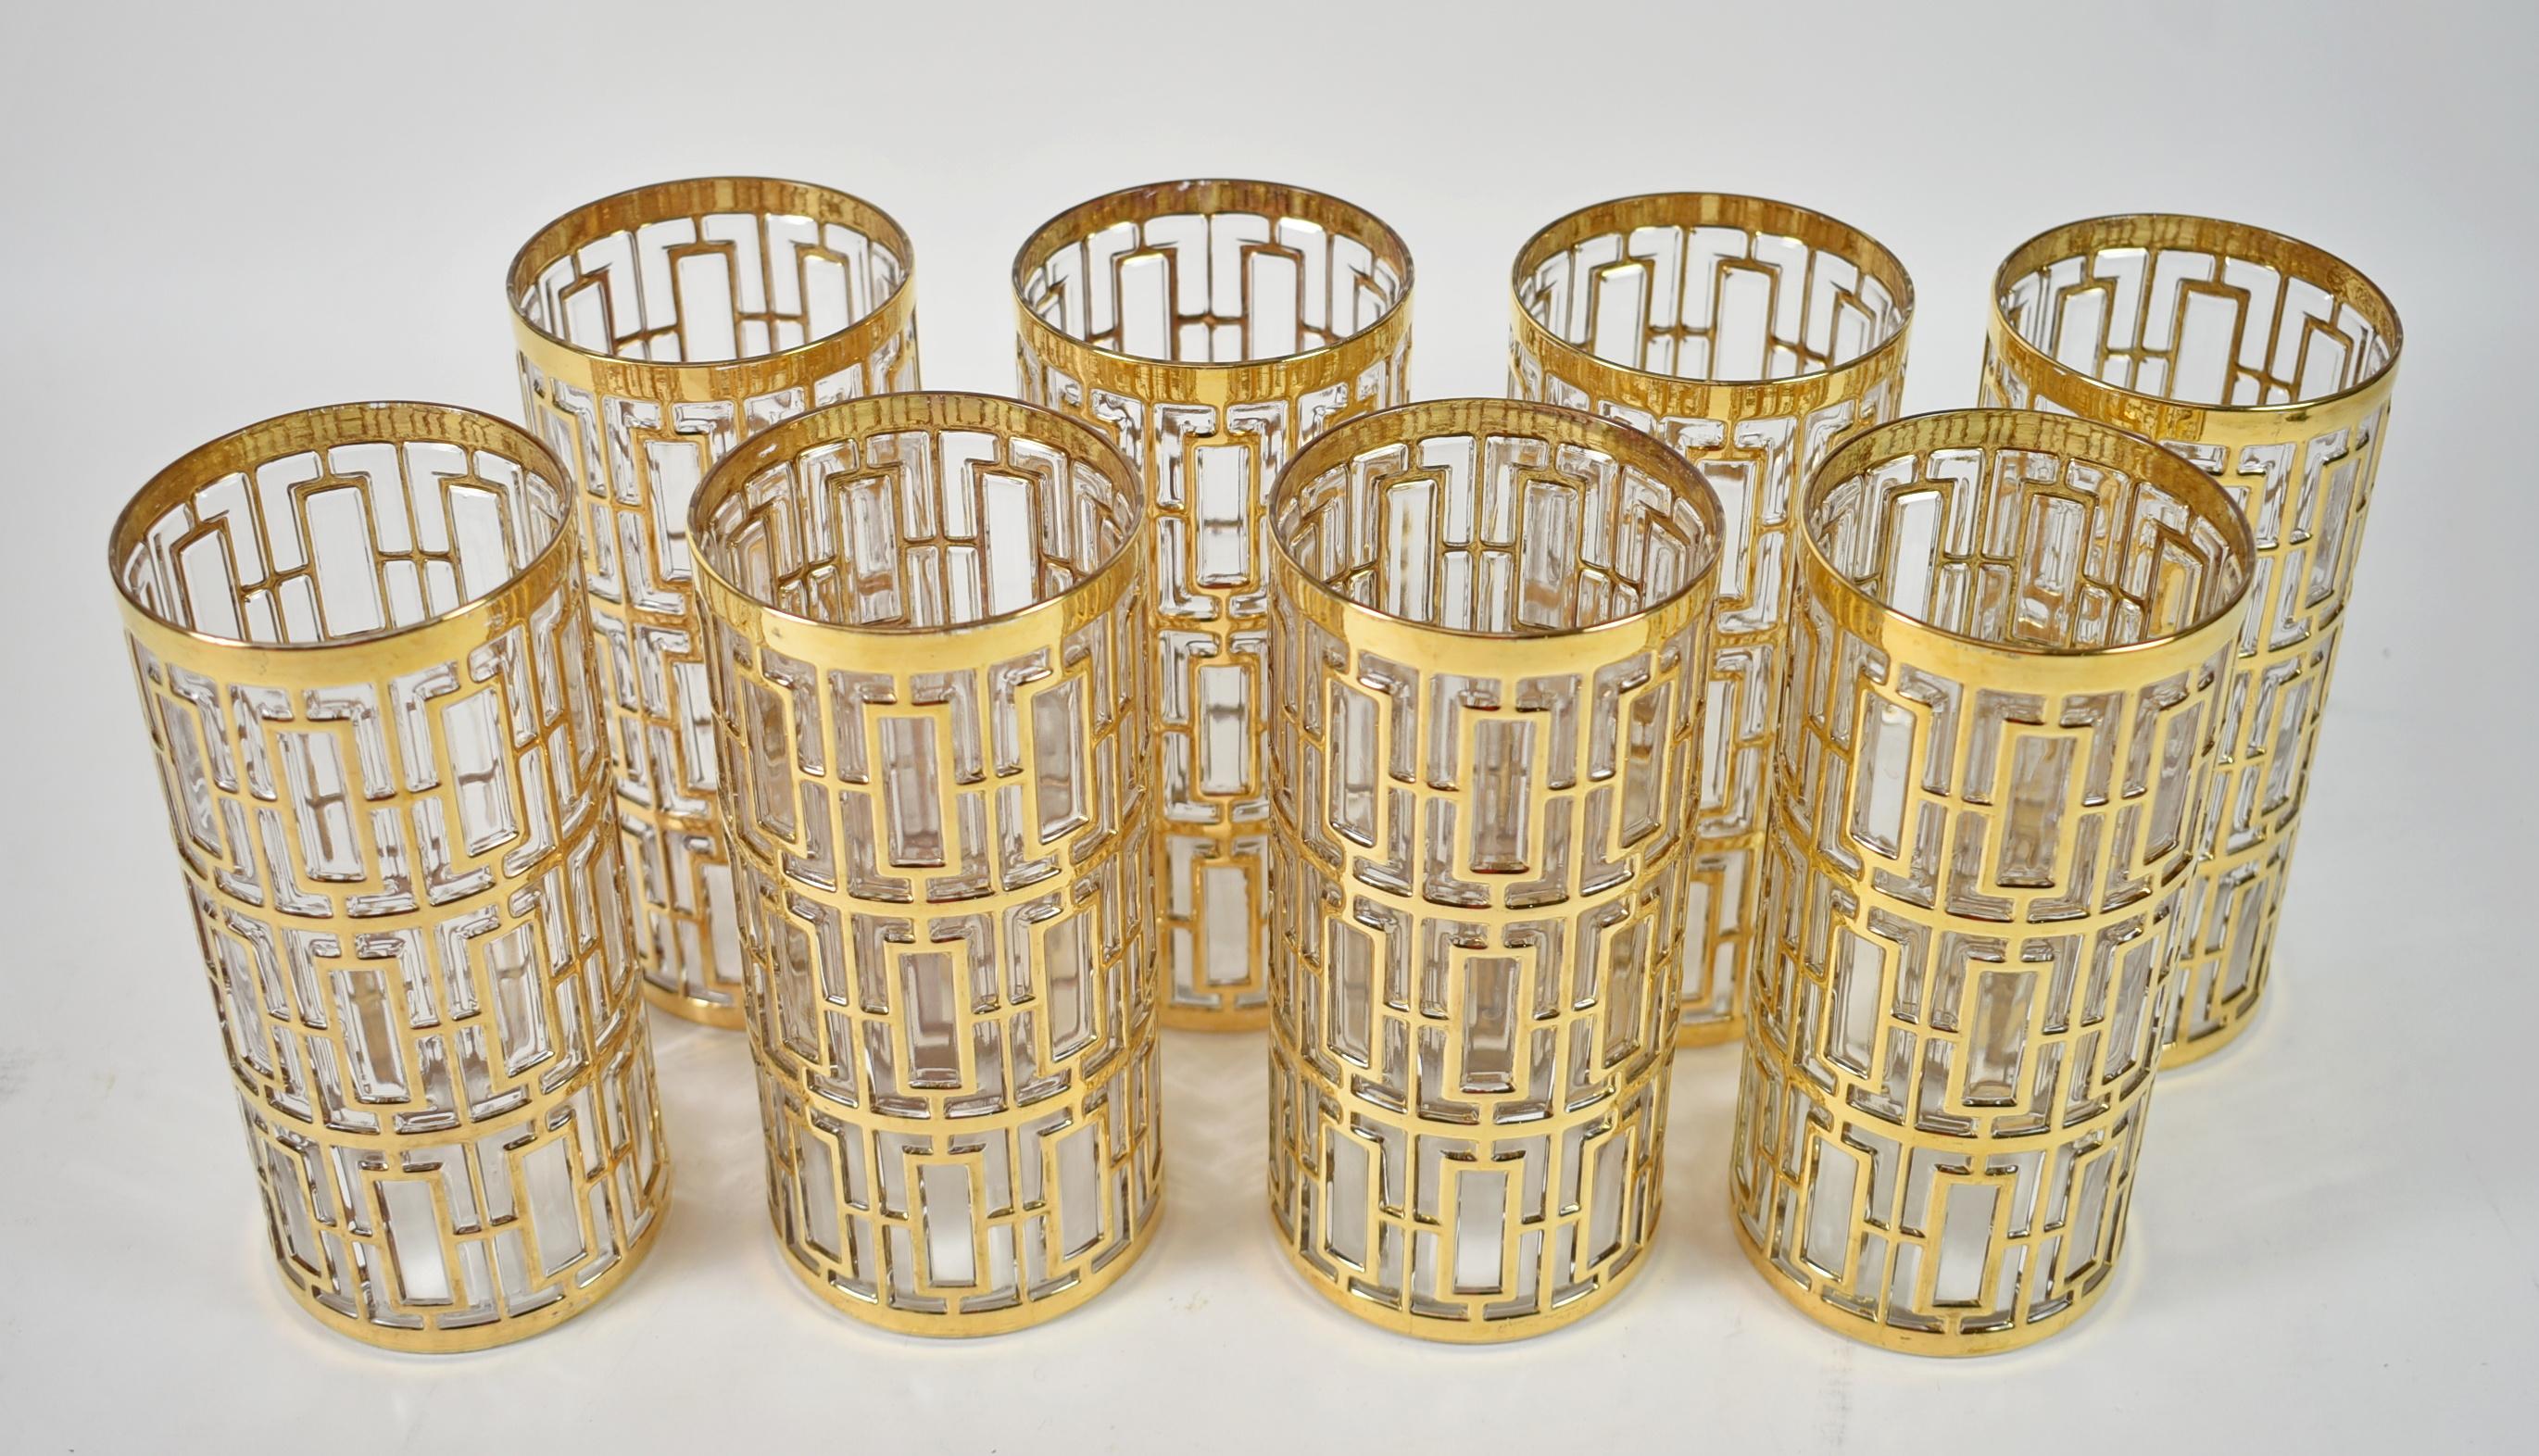 22K Gold Overlay Imperial Glass Shoji Pattern Highball/Tall Barware Glasses. Elegant Vintage Imperial Glass highball/tall glasses have the iconic and collected 22K gold overlay over glass called the Shoji or Greek Key. These are from the 60's and